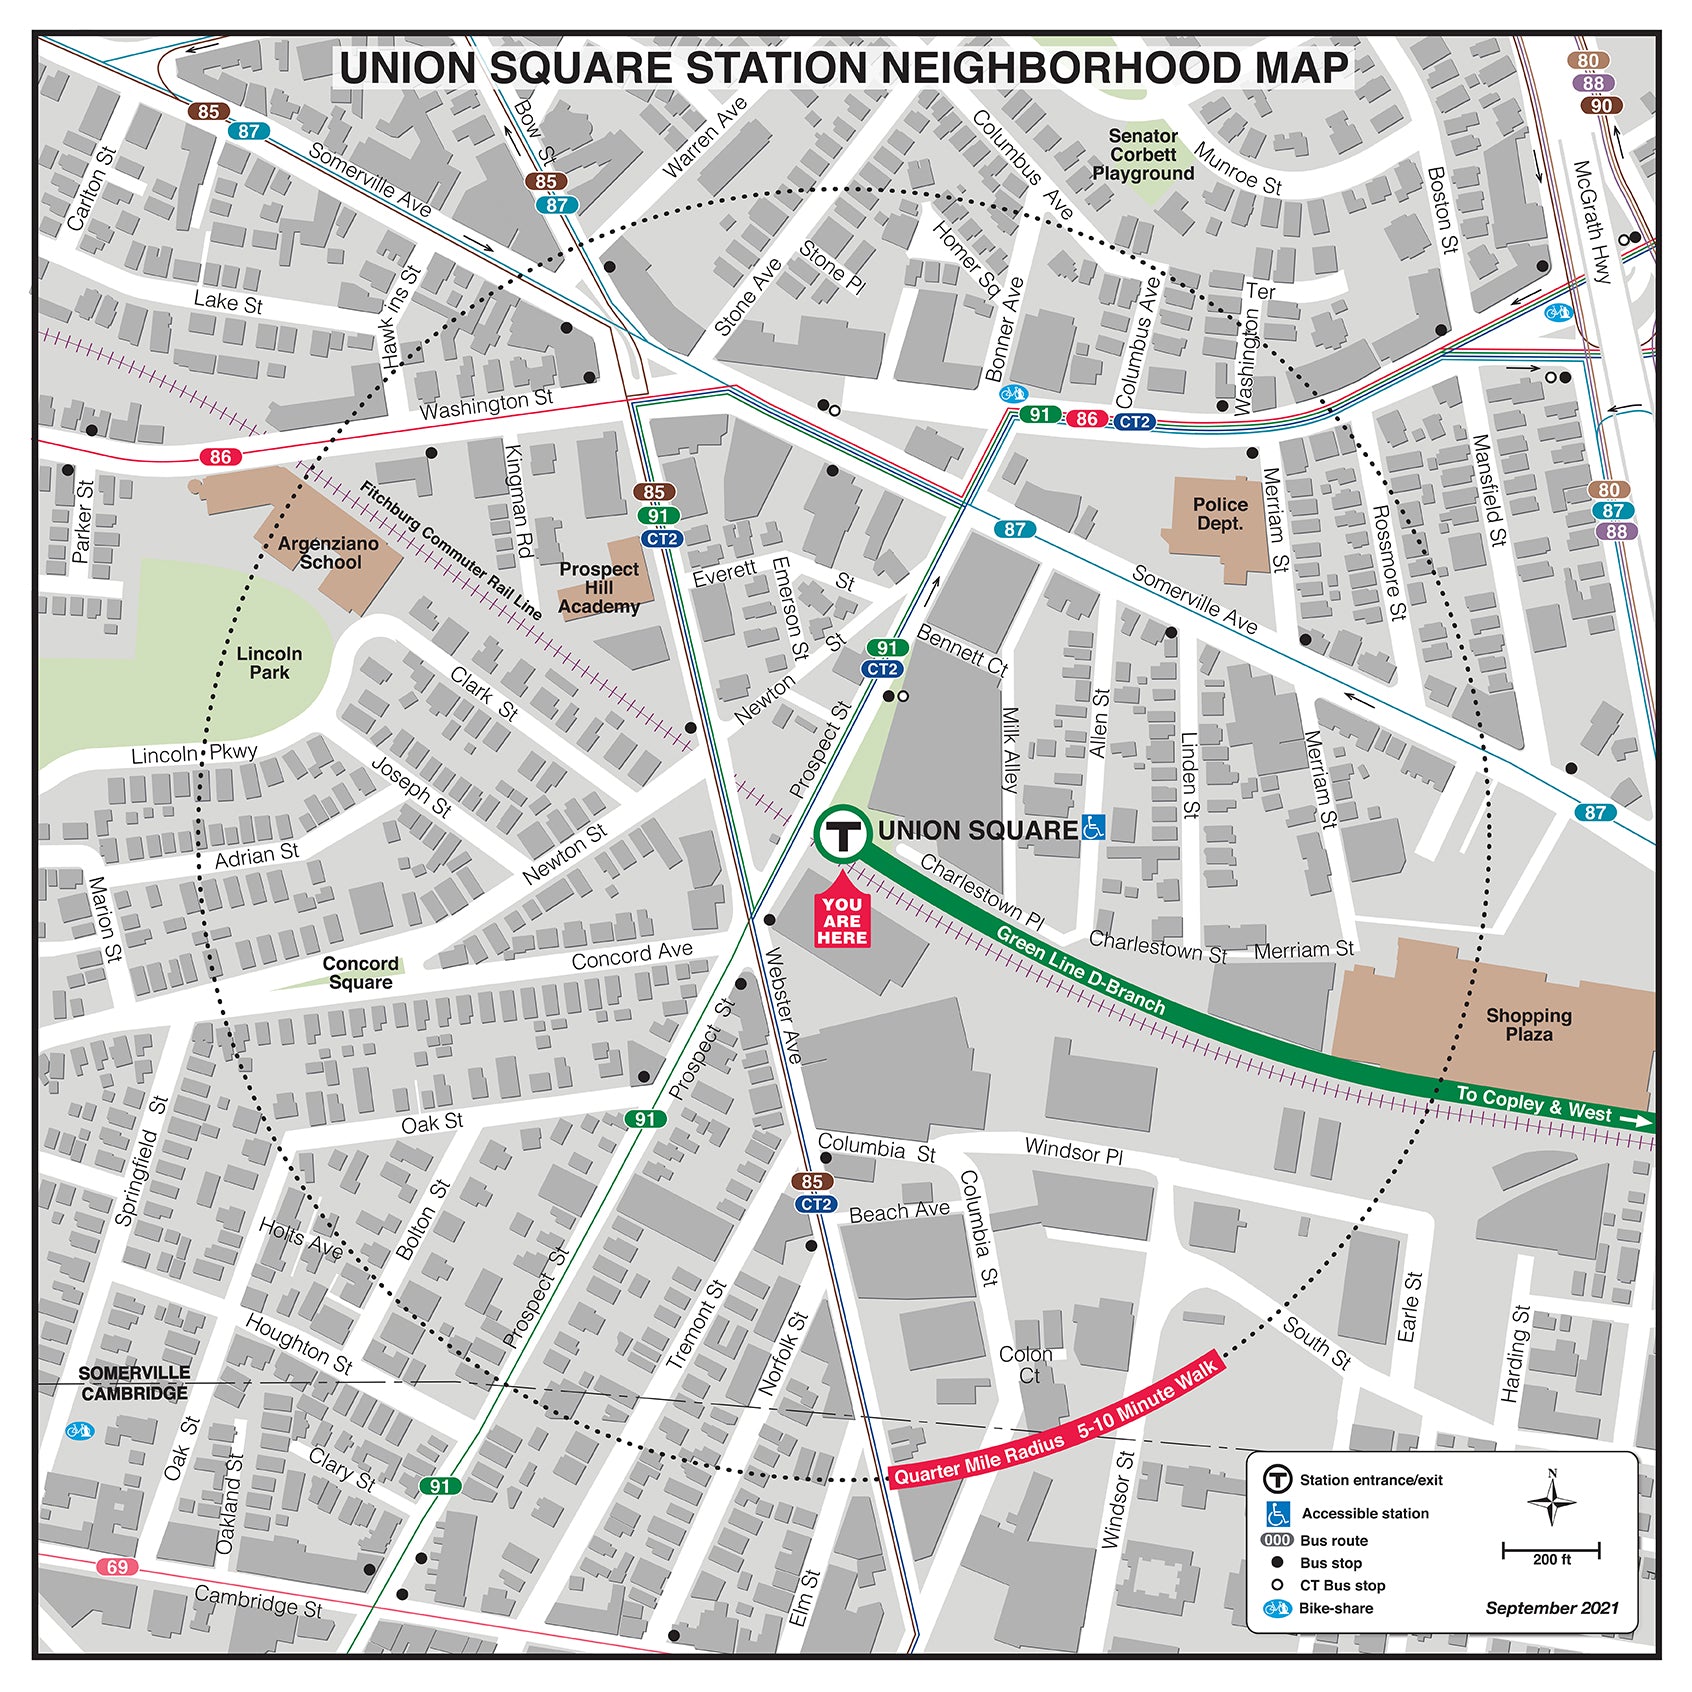 Green Line Station Neighborhood Map: Union Square (March 2022)